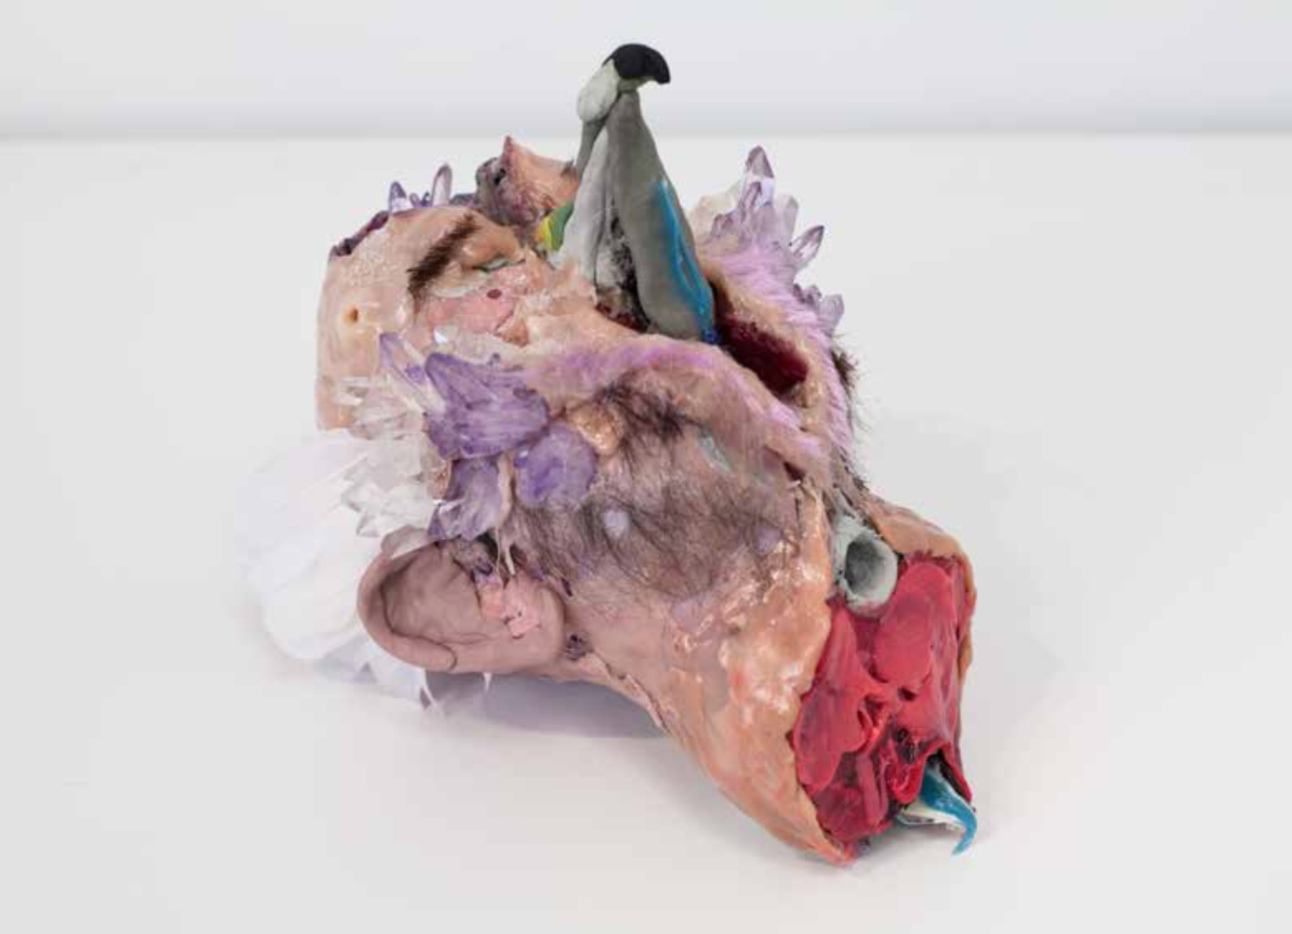 Lot #1 
David Altmejd
Untitled, 2013
Epoxy clay, epoxy gel, resin, acrylic paint, synthetic hair, chicken feathers, quartz, glass stain, glitter
10 1⁄2 × 11 1⁄2 × 8 inches